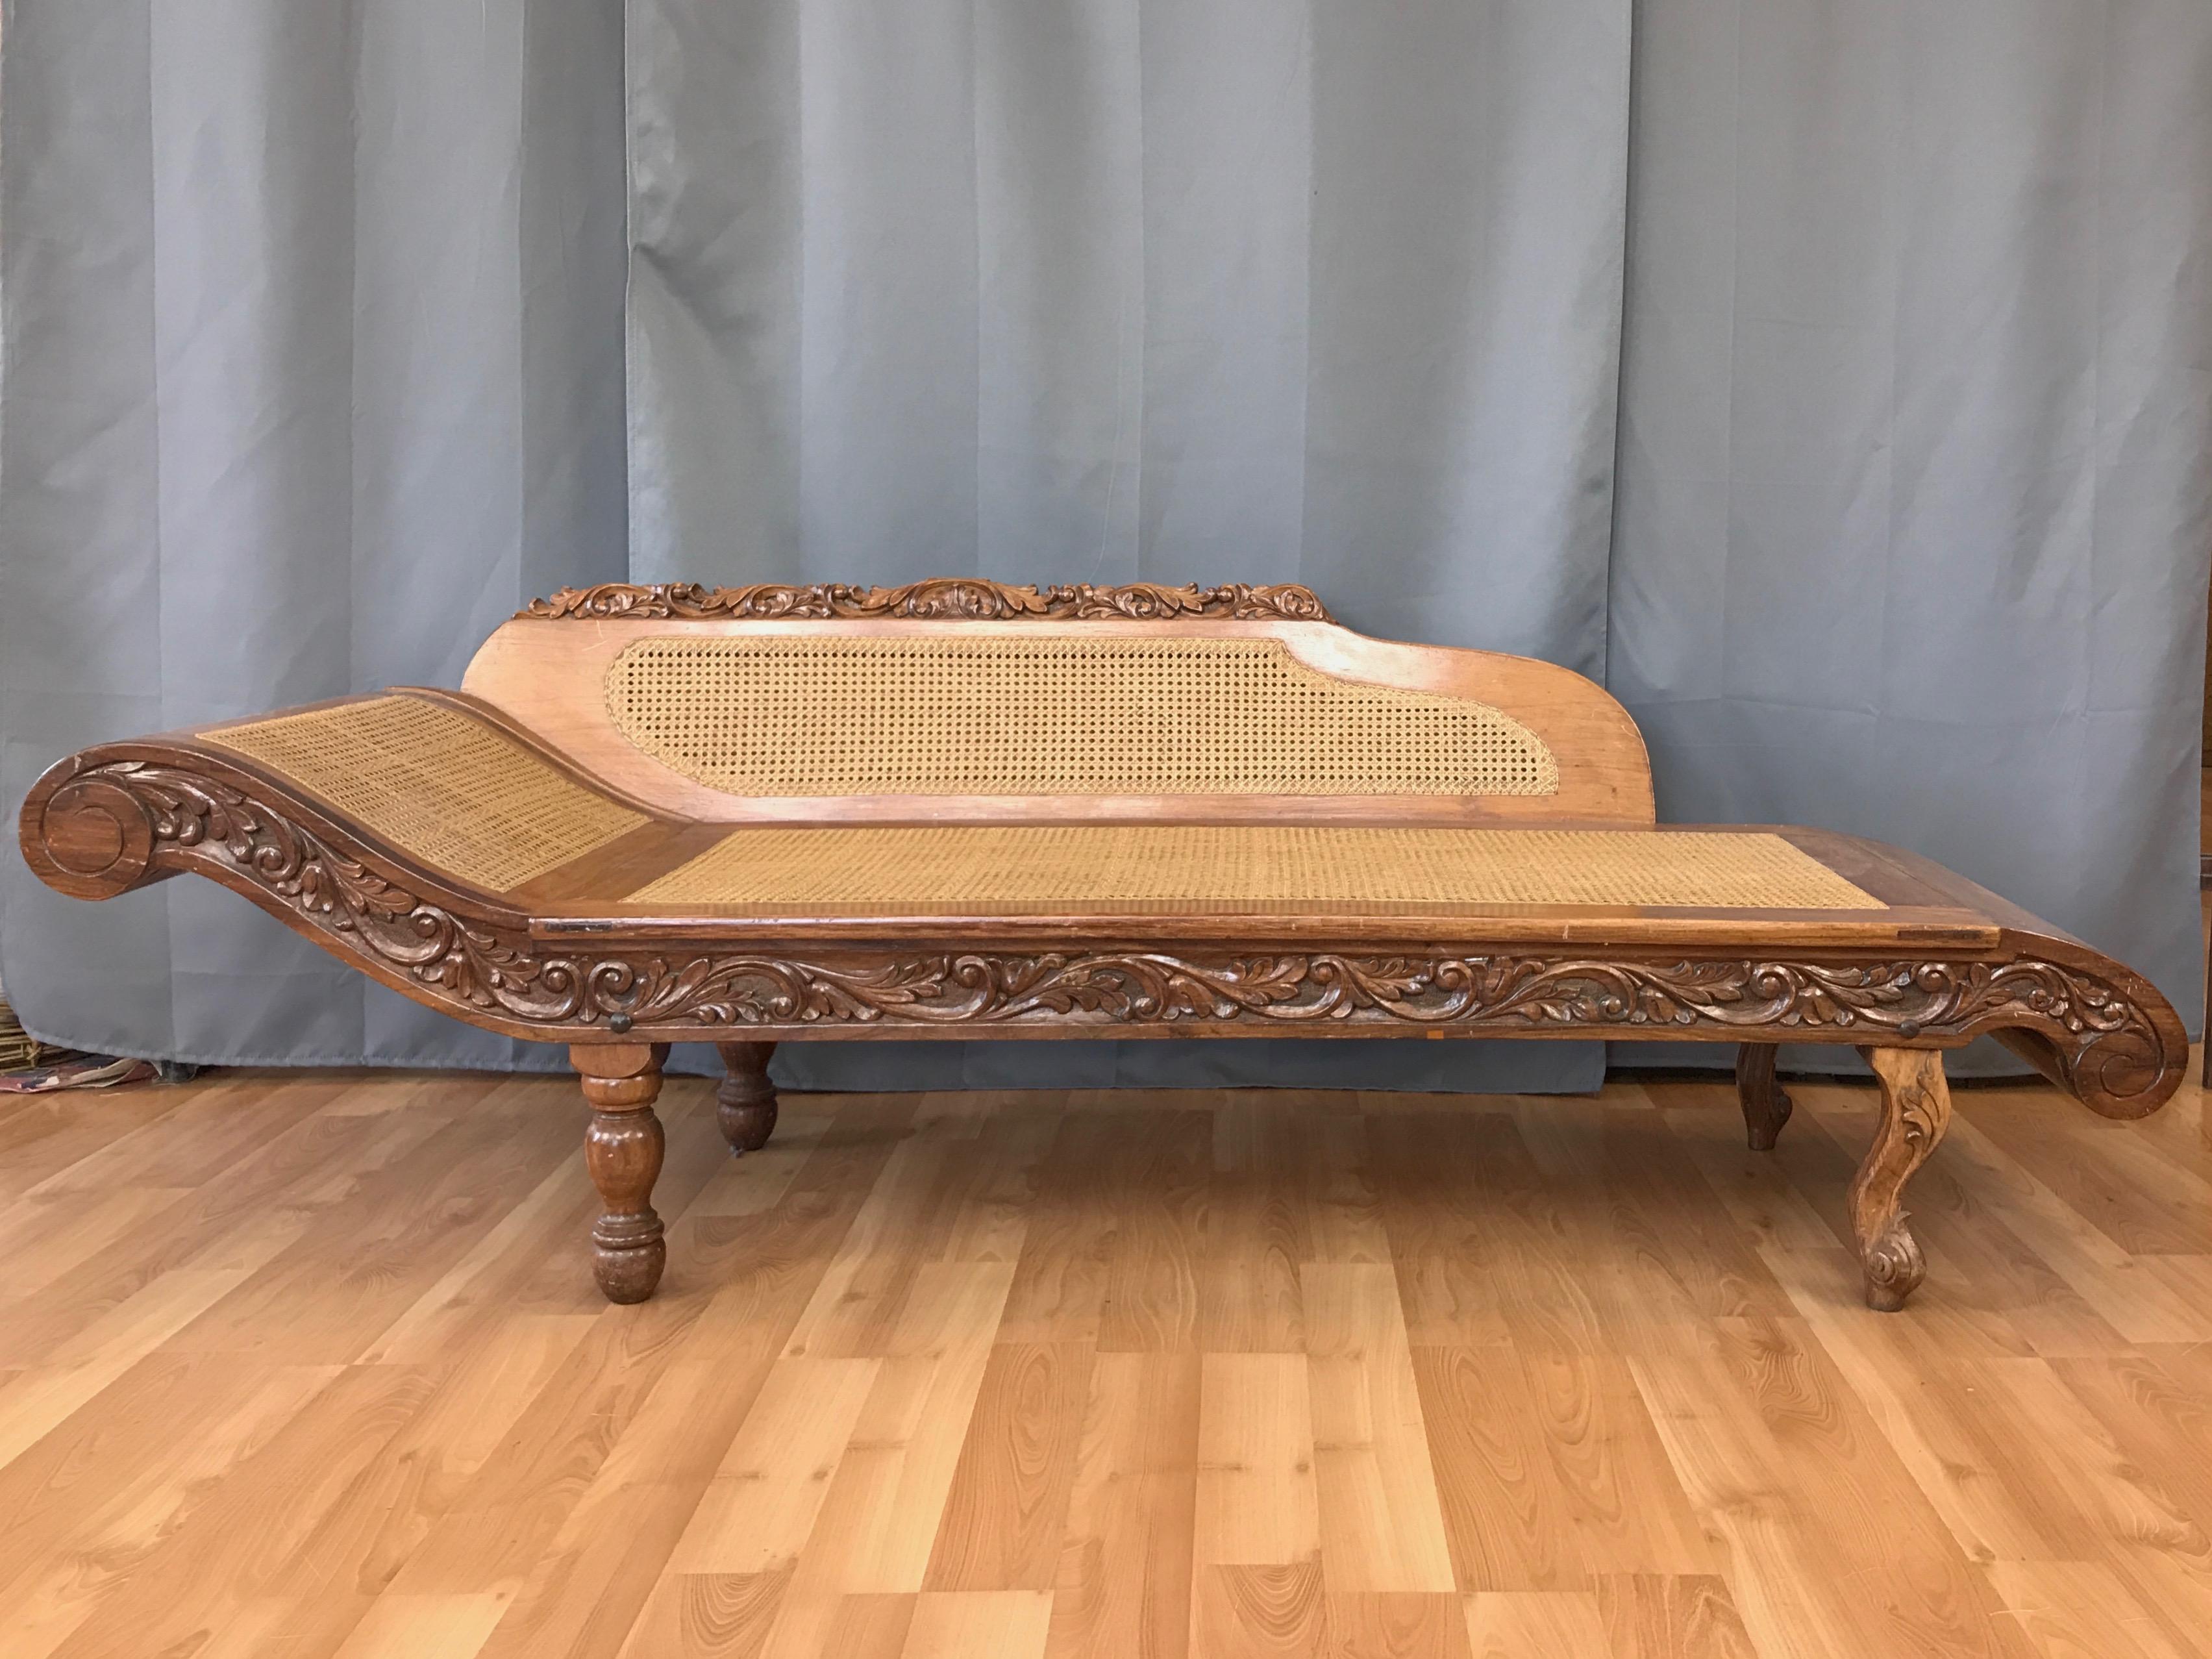 An impressively sized and well crafted mid-century Chinese daybed or chaise lounge in annatto wood and woven rattan.

Form inspired by the “Daybed for Imperial Concubine” (also known as the “Daybed for the Beauty”), which was a more petite piece of